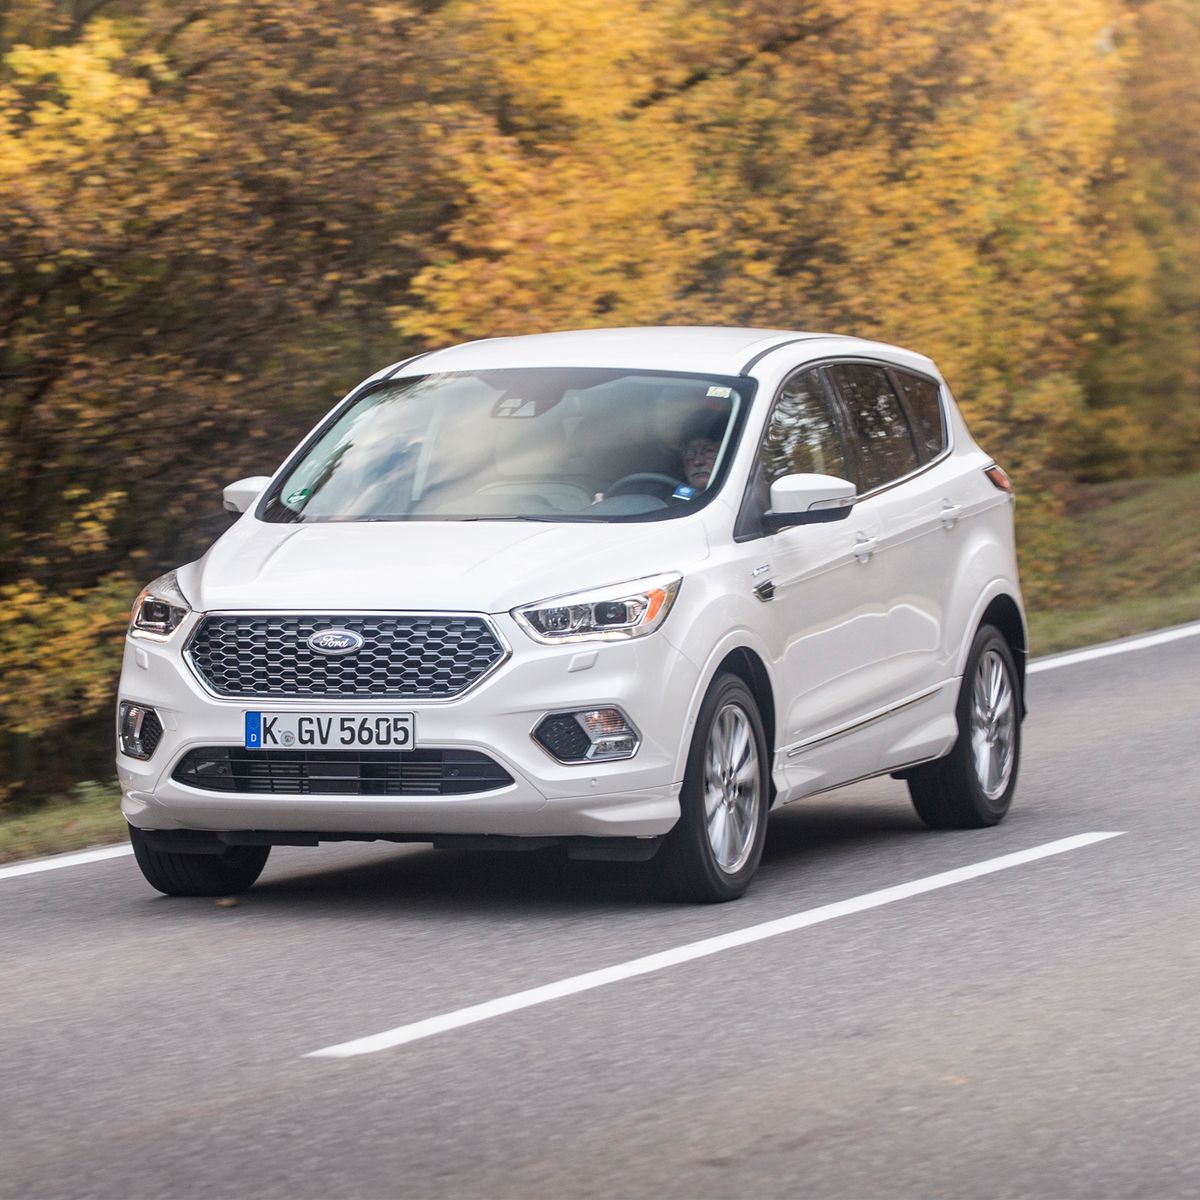 The Fanciest Ford Escape Ever: We Drive the Kuga Vignale, Review